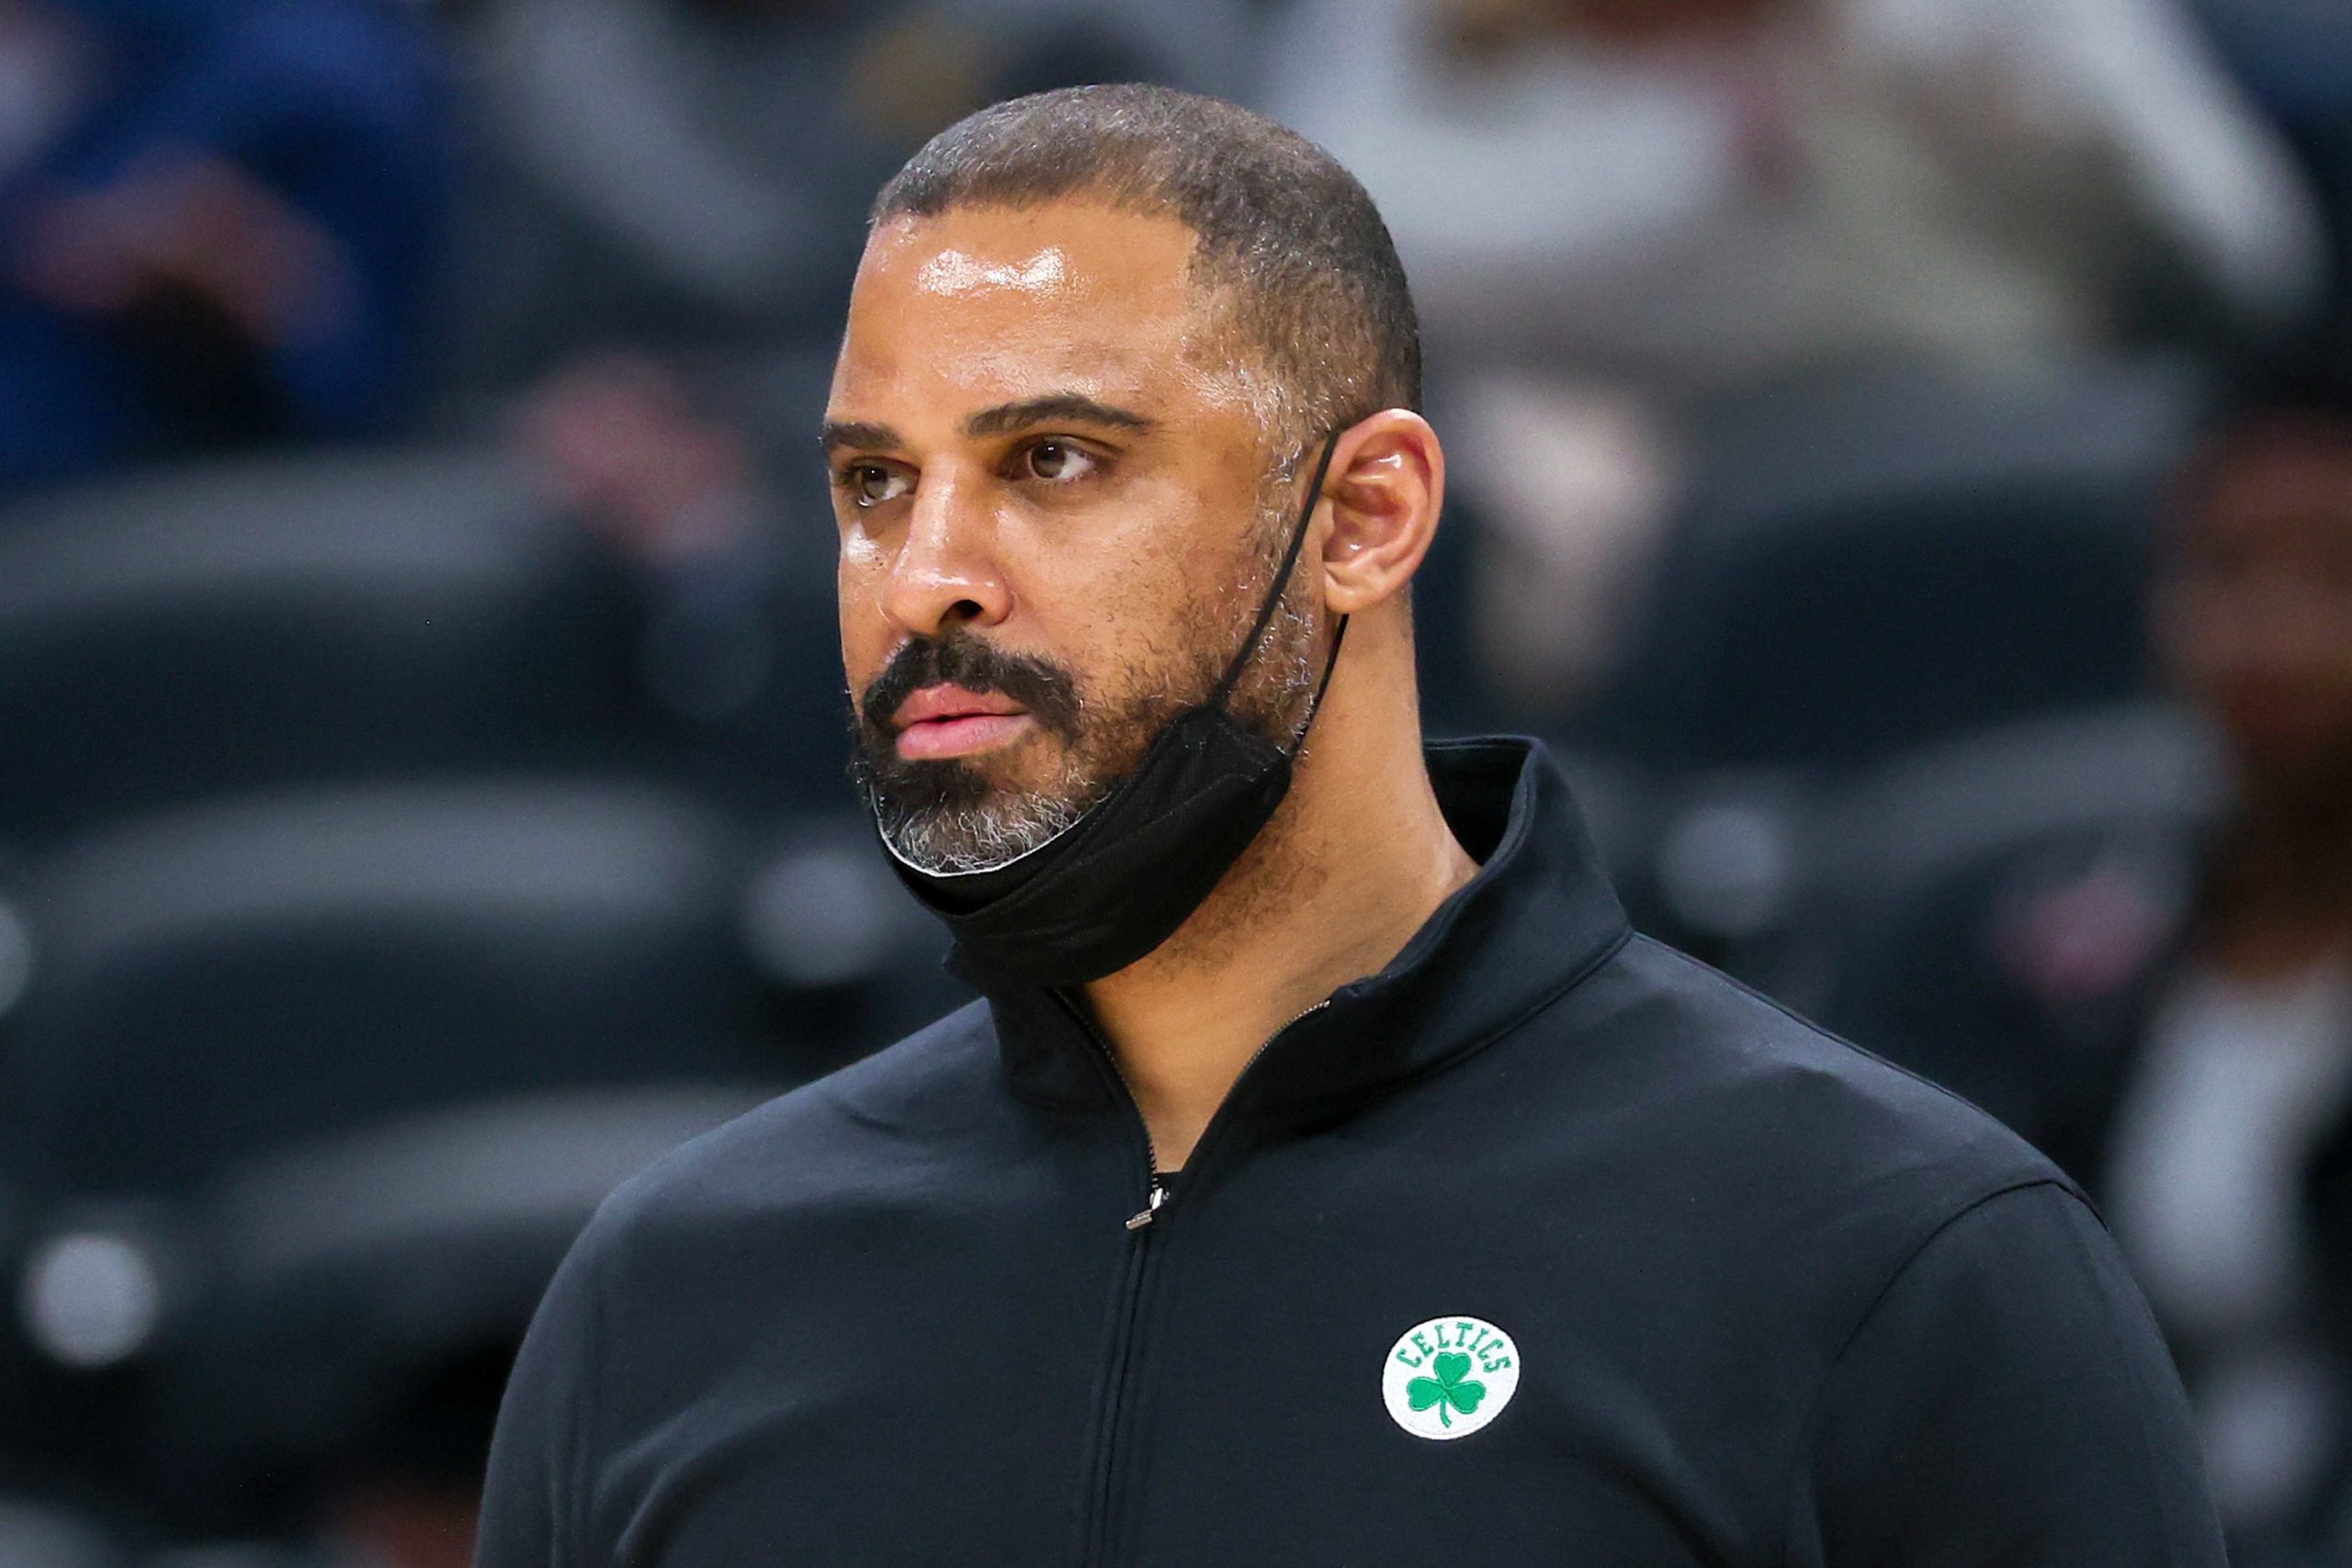 Head coach Ime Udoka of the Boston Celtics looks on in the fourth quarter against the Indiana Pacers.